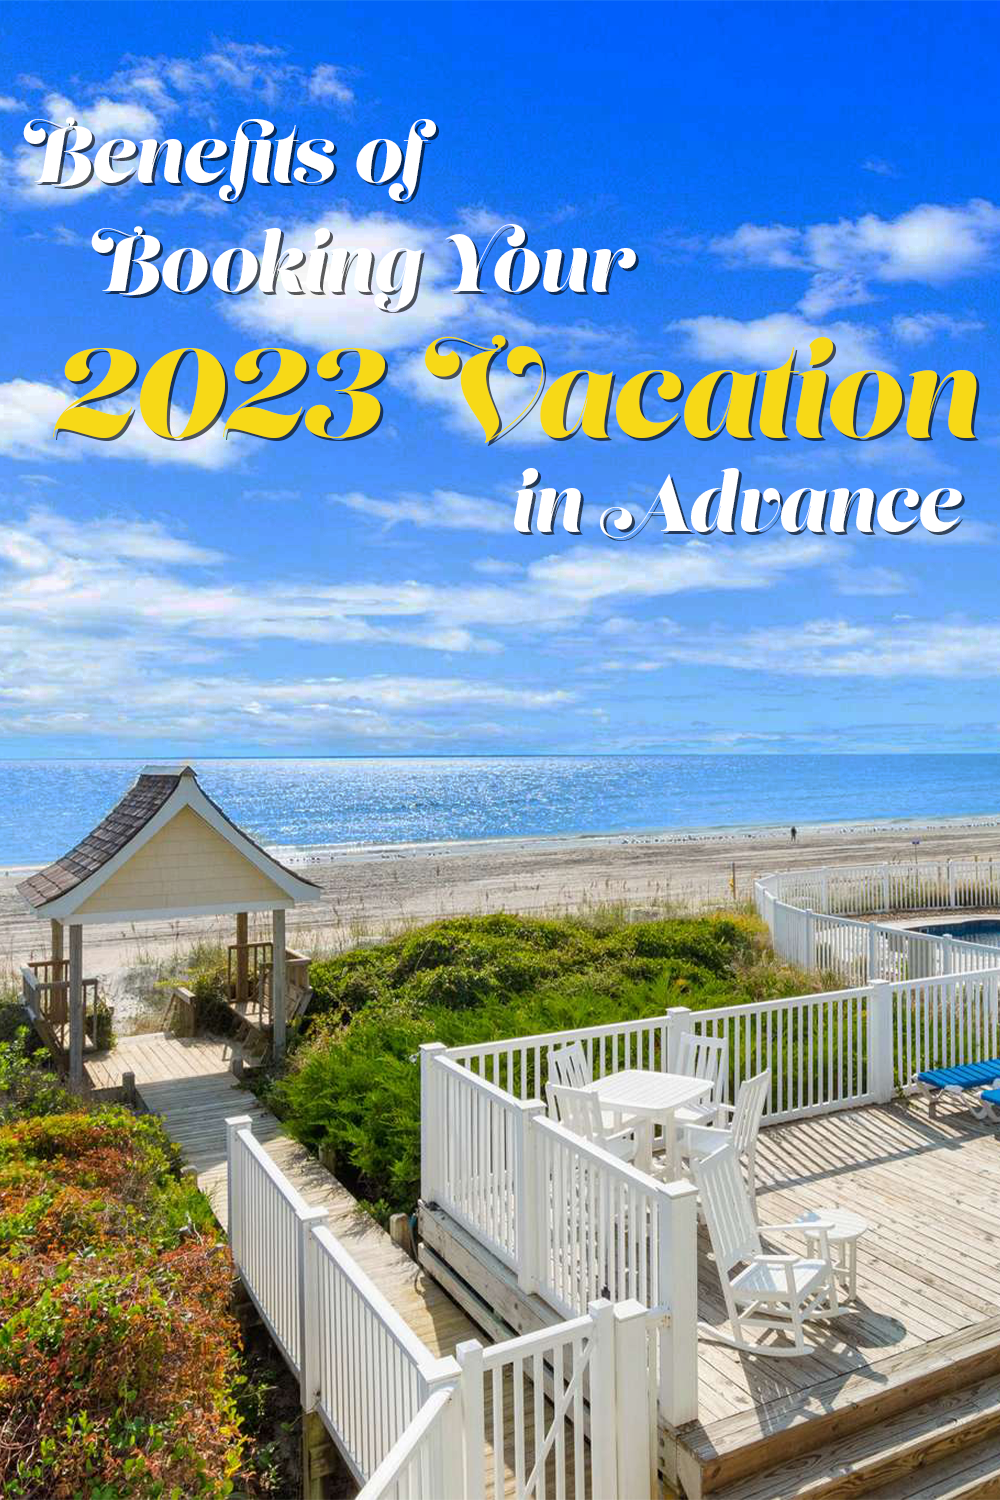 Book your 2023 vacation with Emerald Isle Realty.